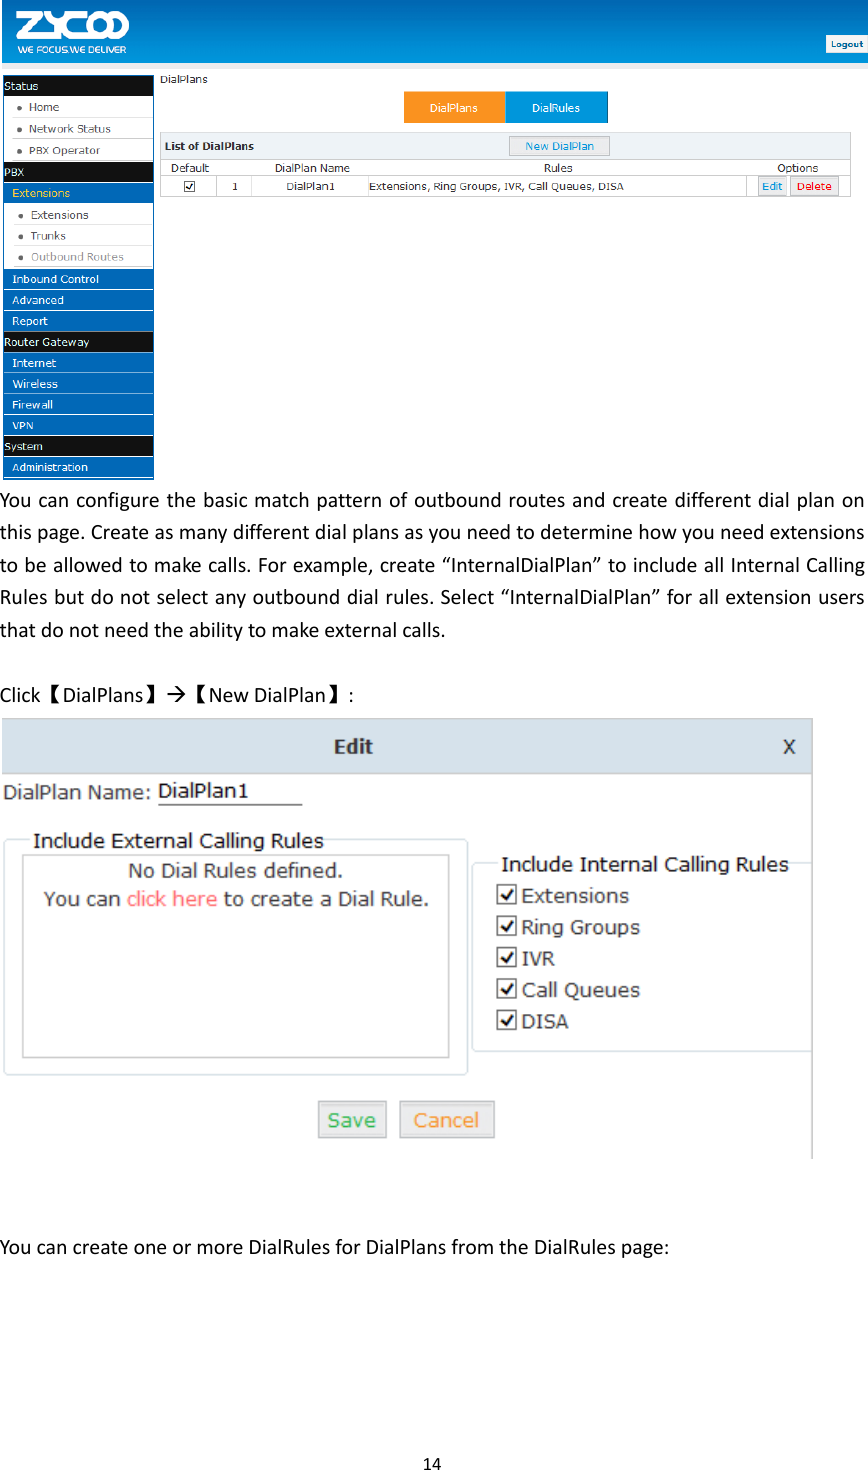  14   You can configure the basic match pattern of outbound routes and create different dial plan on this page. Create as many different dial plans as you need to determine how you need extensions to be allowed to make calls. For example, create “InternalDialPlan” to include all Internal Calling Rules but do not select any outbound dial rules. Select “InternalDialPlan” for all extension users that do not need the ability to make external calls.      Click【DialPlans】【New DialPlan】:    You can create one or more DialRules for DialPlans from the DialRules page: 